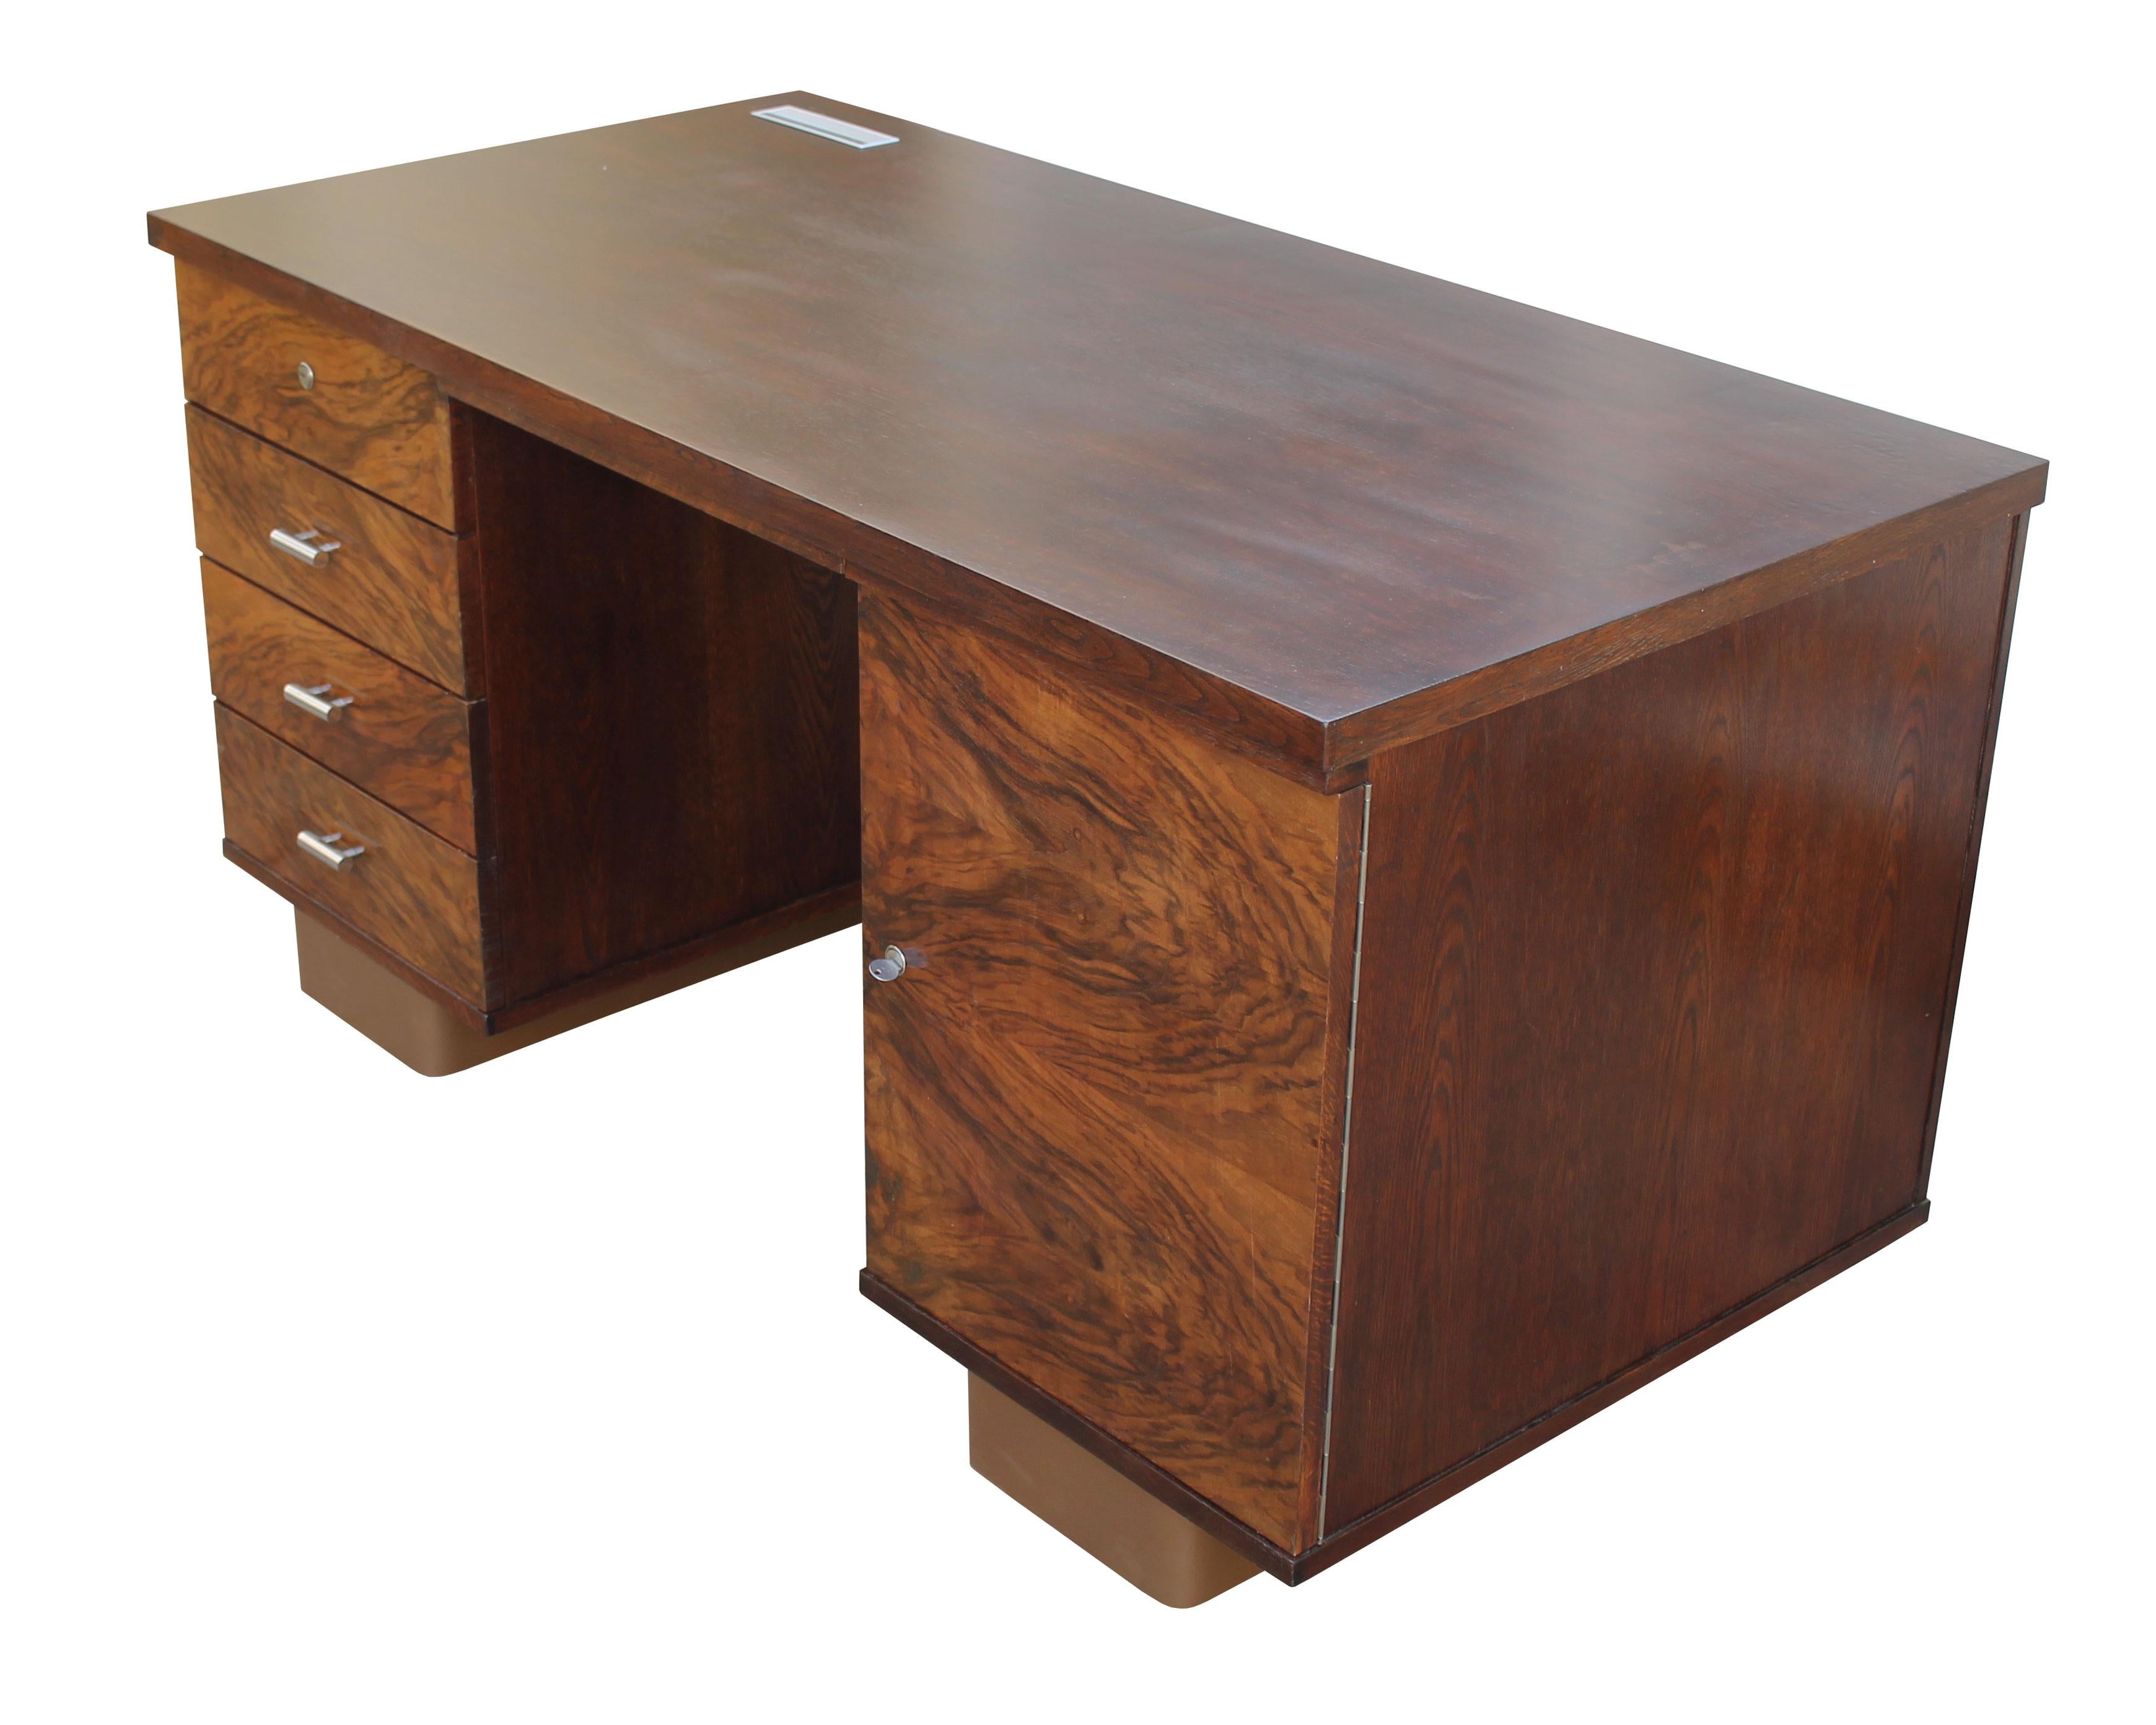 An original Modernist desk from the 1930s. This piece has a dignified design with stylish proportions and details together with a dazzling Walnut pattern and dark brown Oak.

This writing / office desk has a rectangle table top made of Oak. The